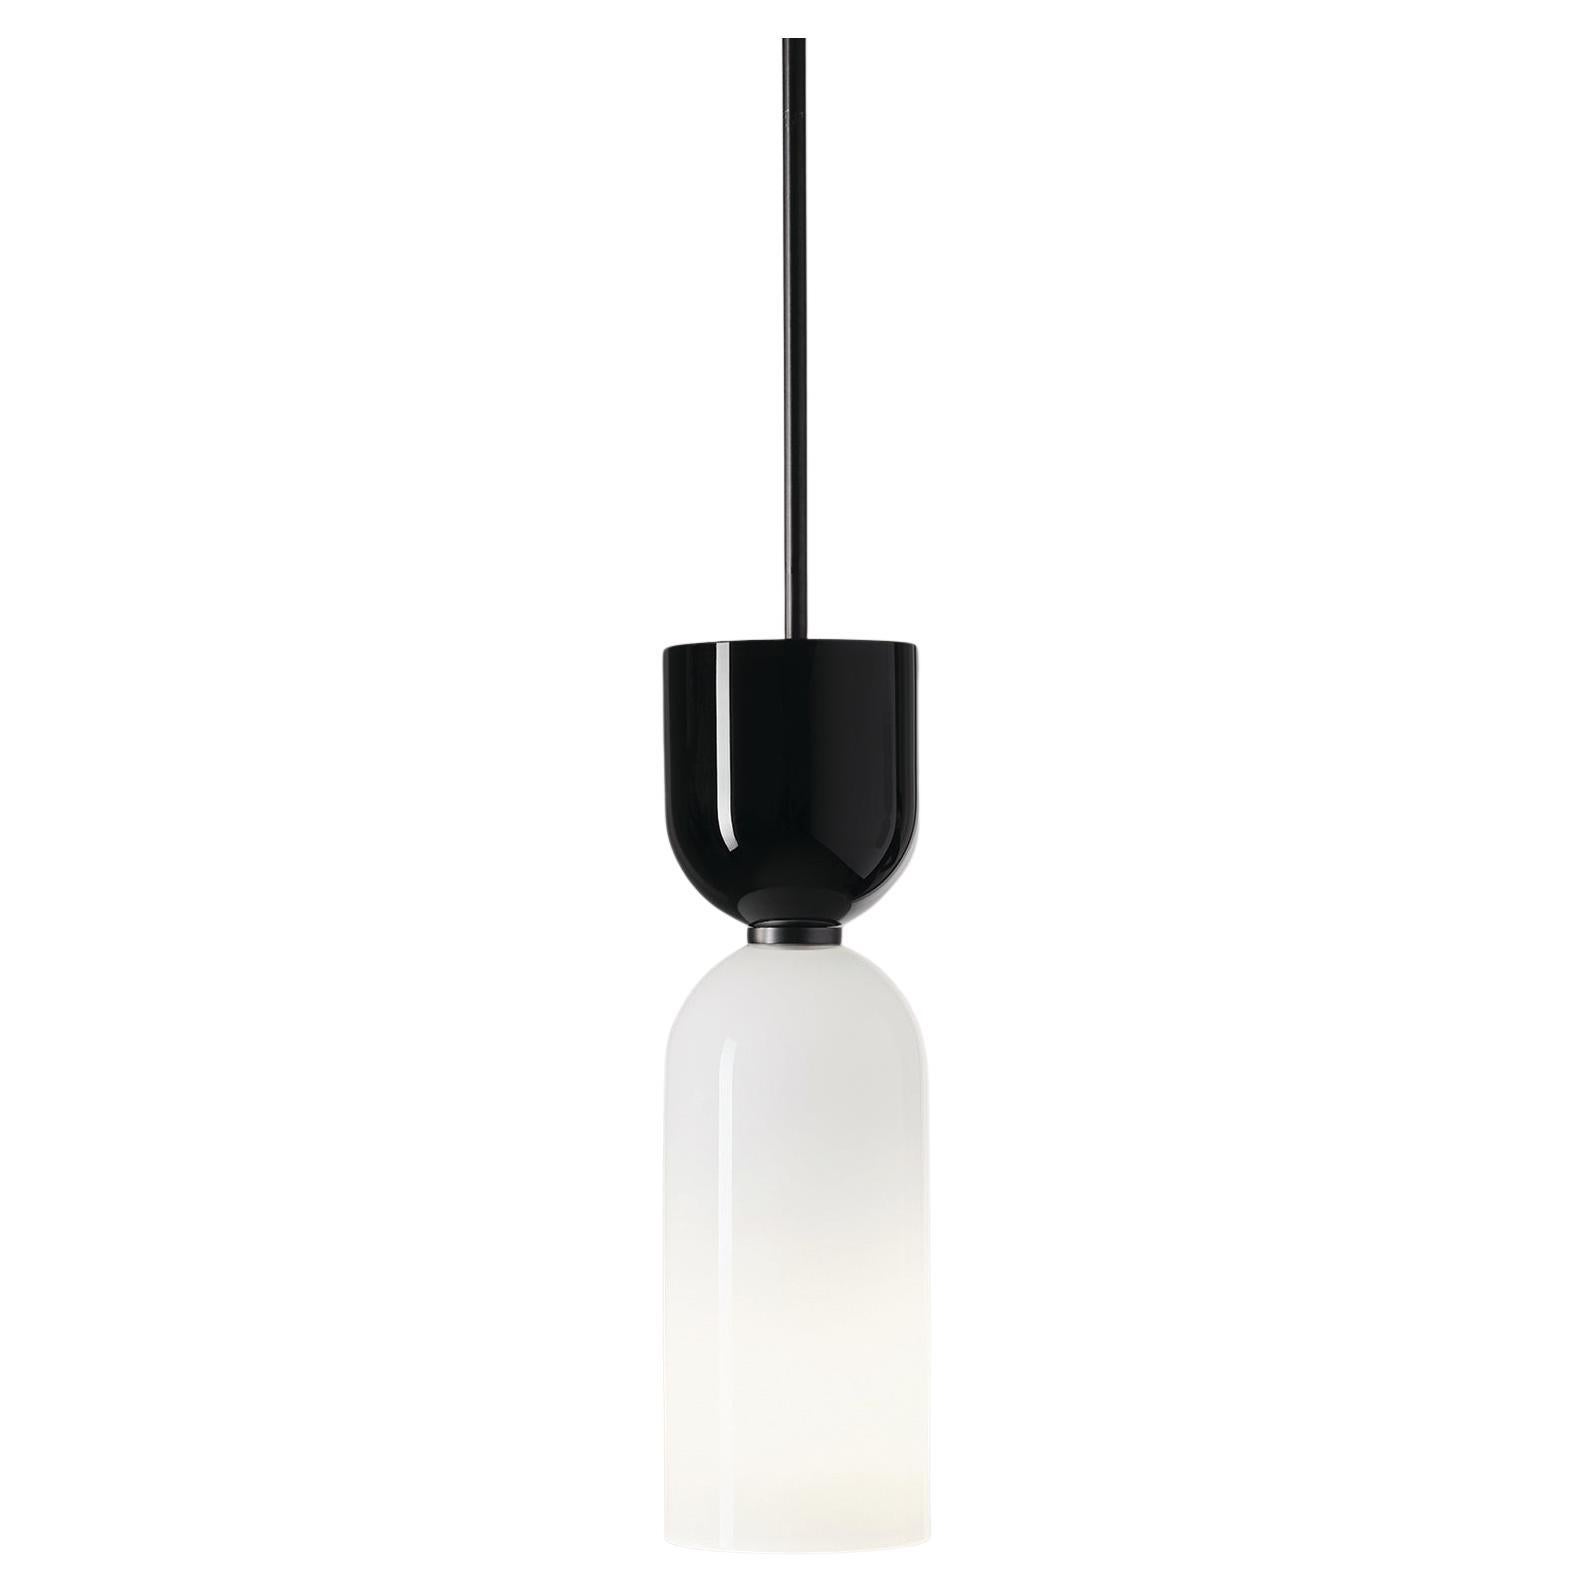 The Edie Pendant pairs two similar forms in hand-blown glass.

Pure shapes, geometry, rhythm and repetition create a harmonious whole when used in multiple, or a streamlined statement when used solo. A contrasting black-and-white color scheme